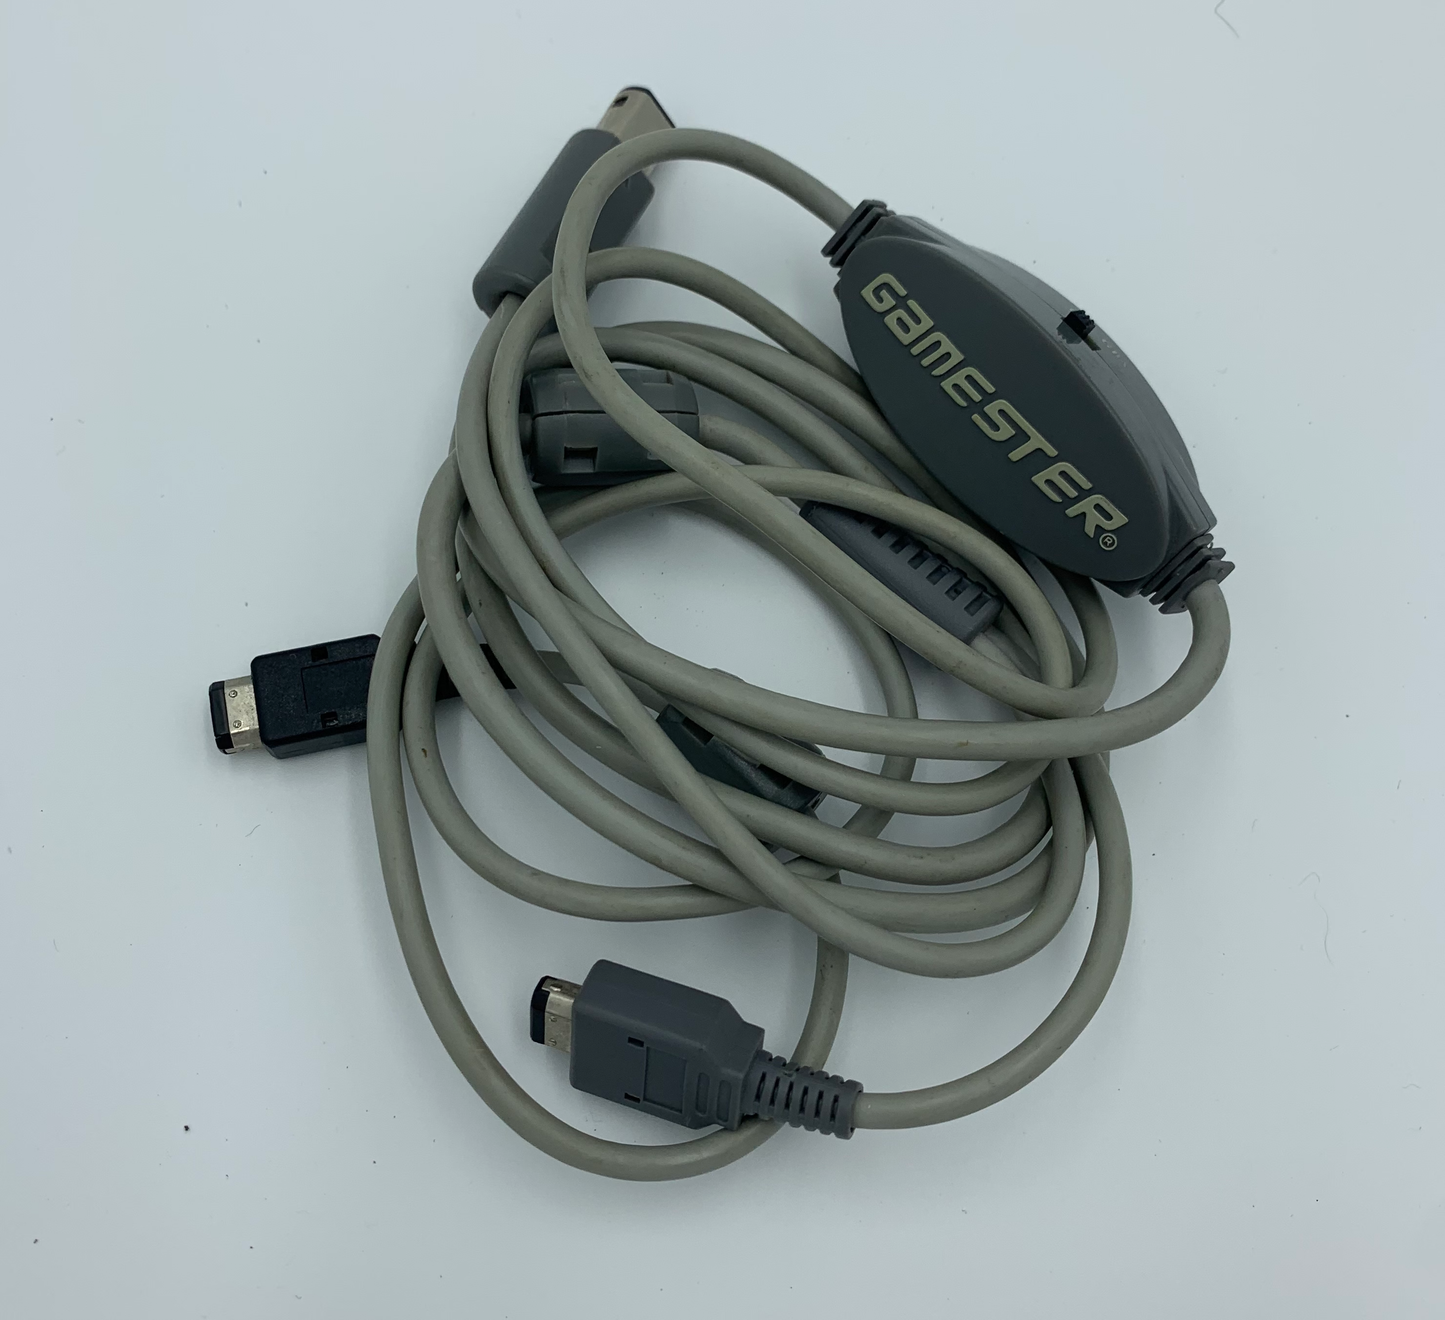 Gameboy Advance Link Cable GBA to GBA or GBA to GC Gamester Grey - Gamecube